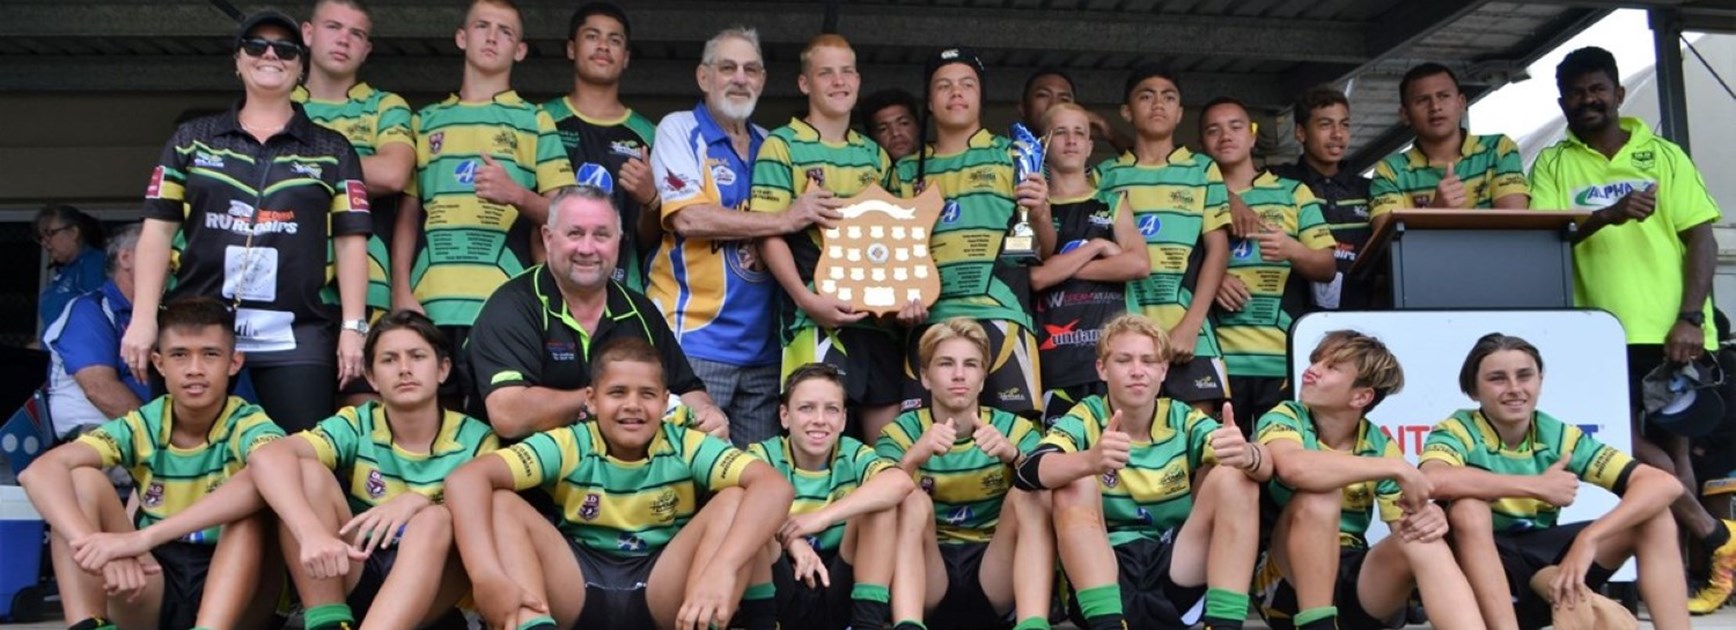 Townsville and Helensvale claim Tassell Trophy wins